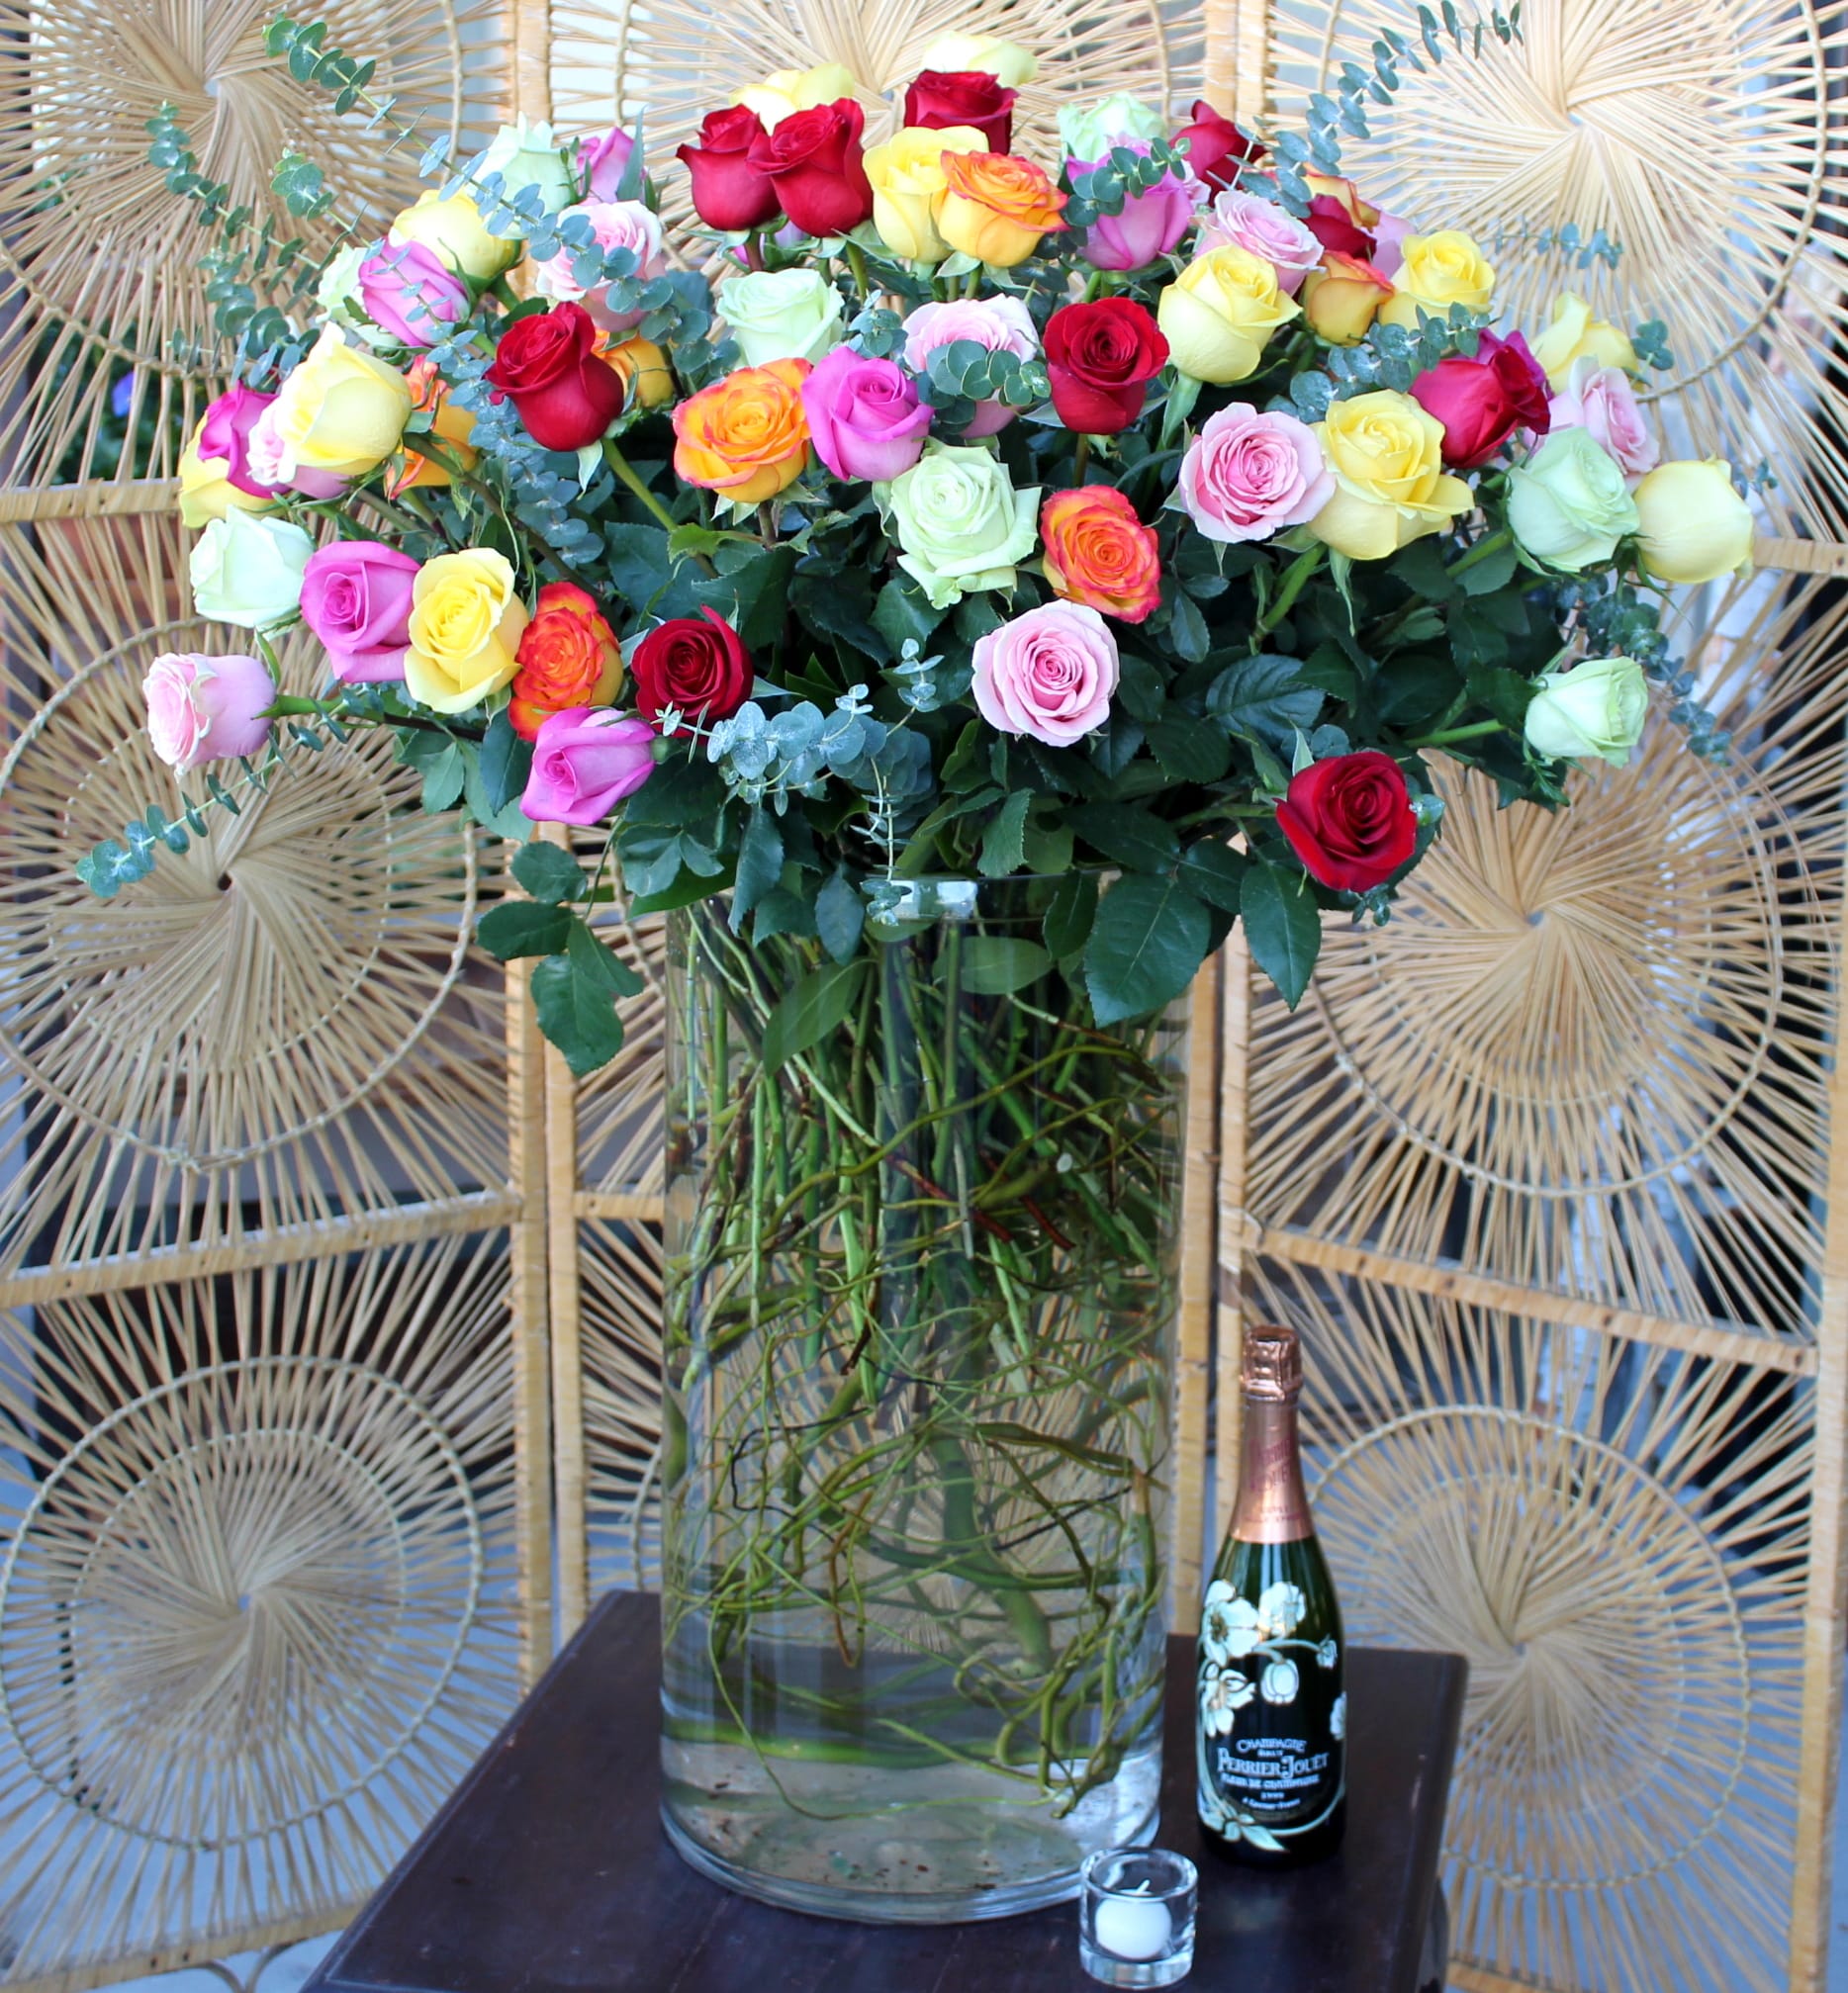 Ultimate Roses - 8 dozen premium roses in a tall clear glass cylinder vase.